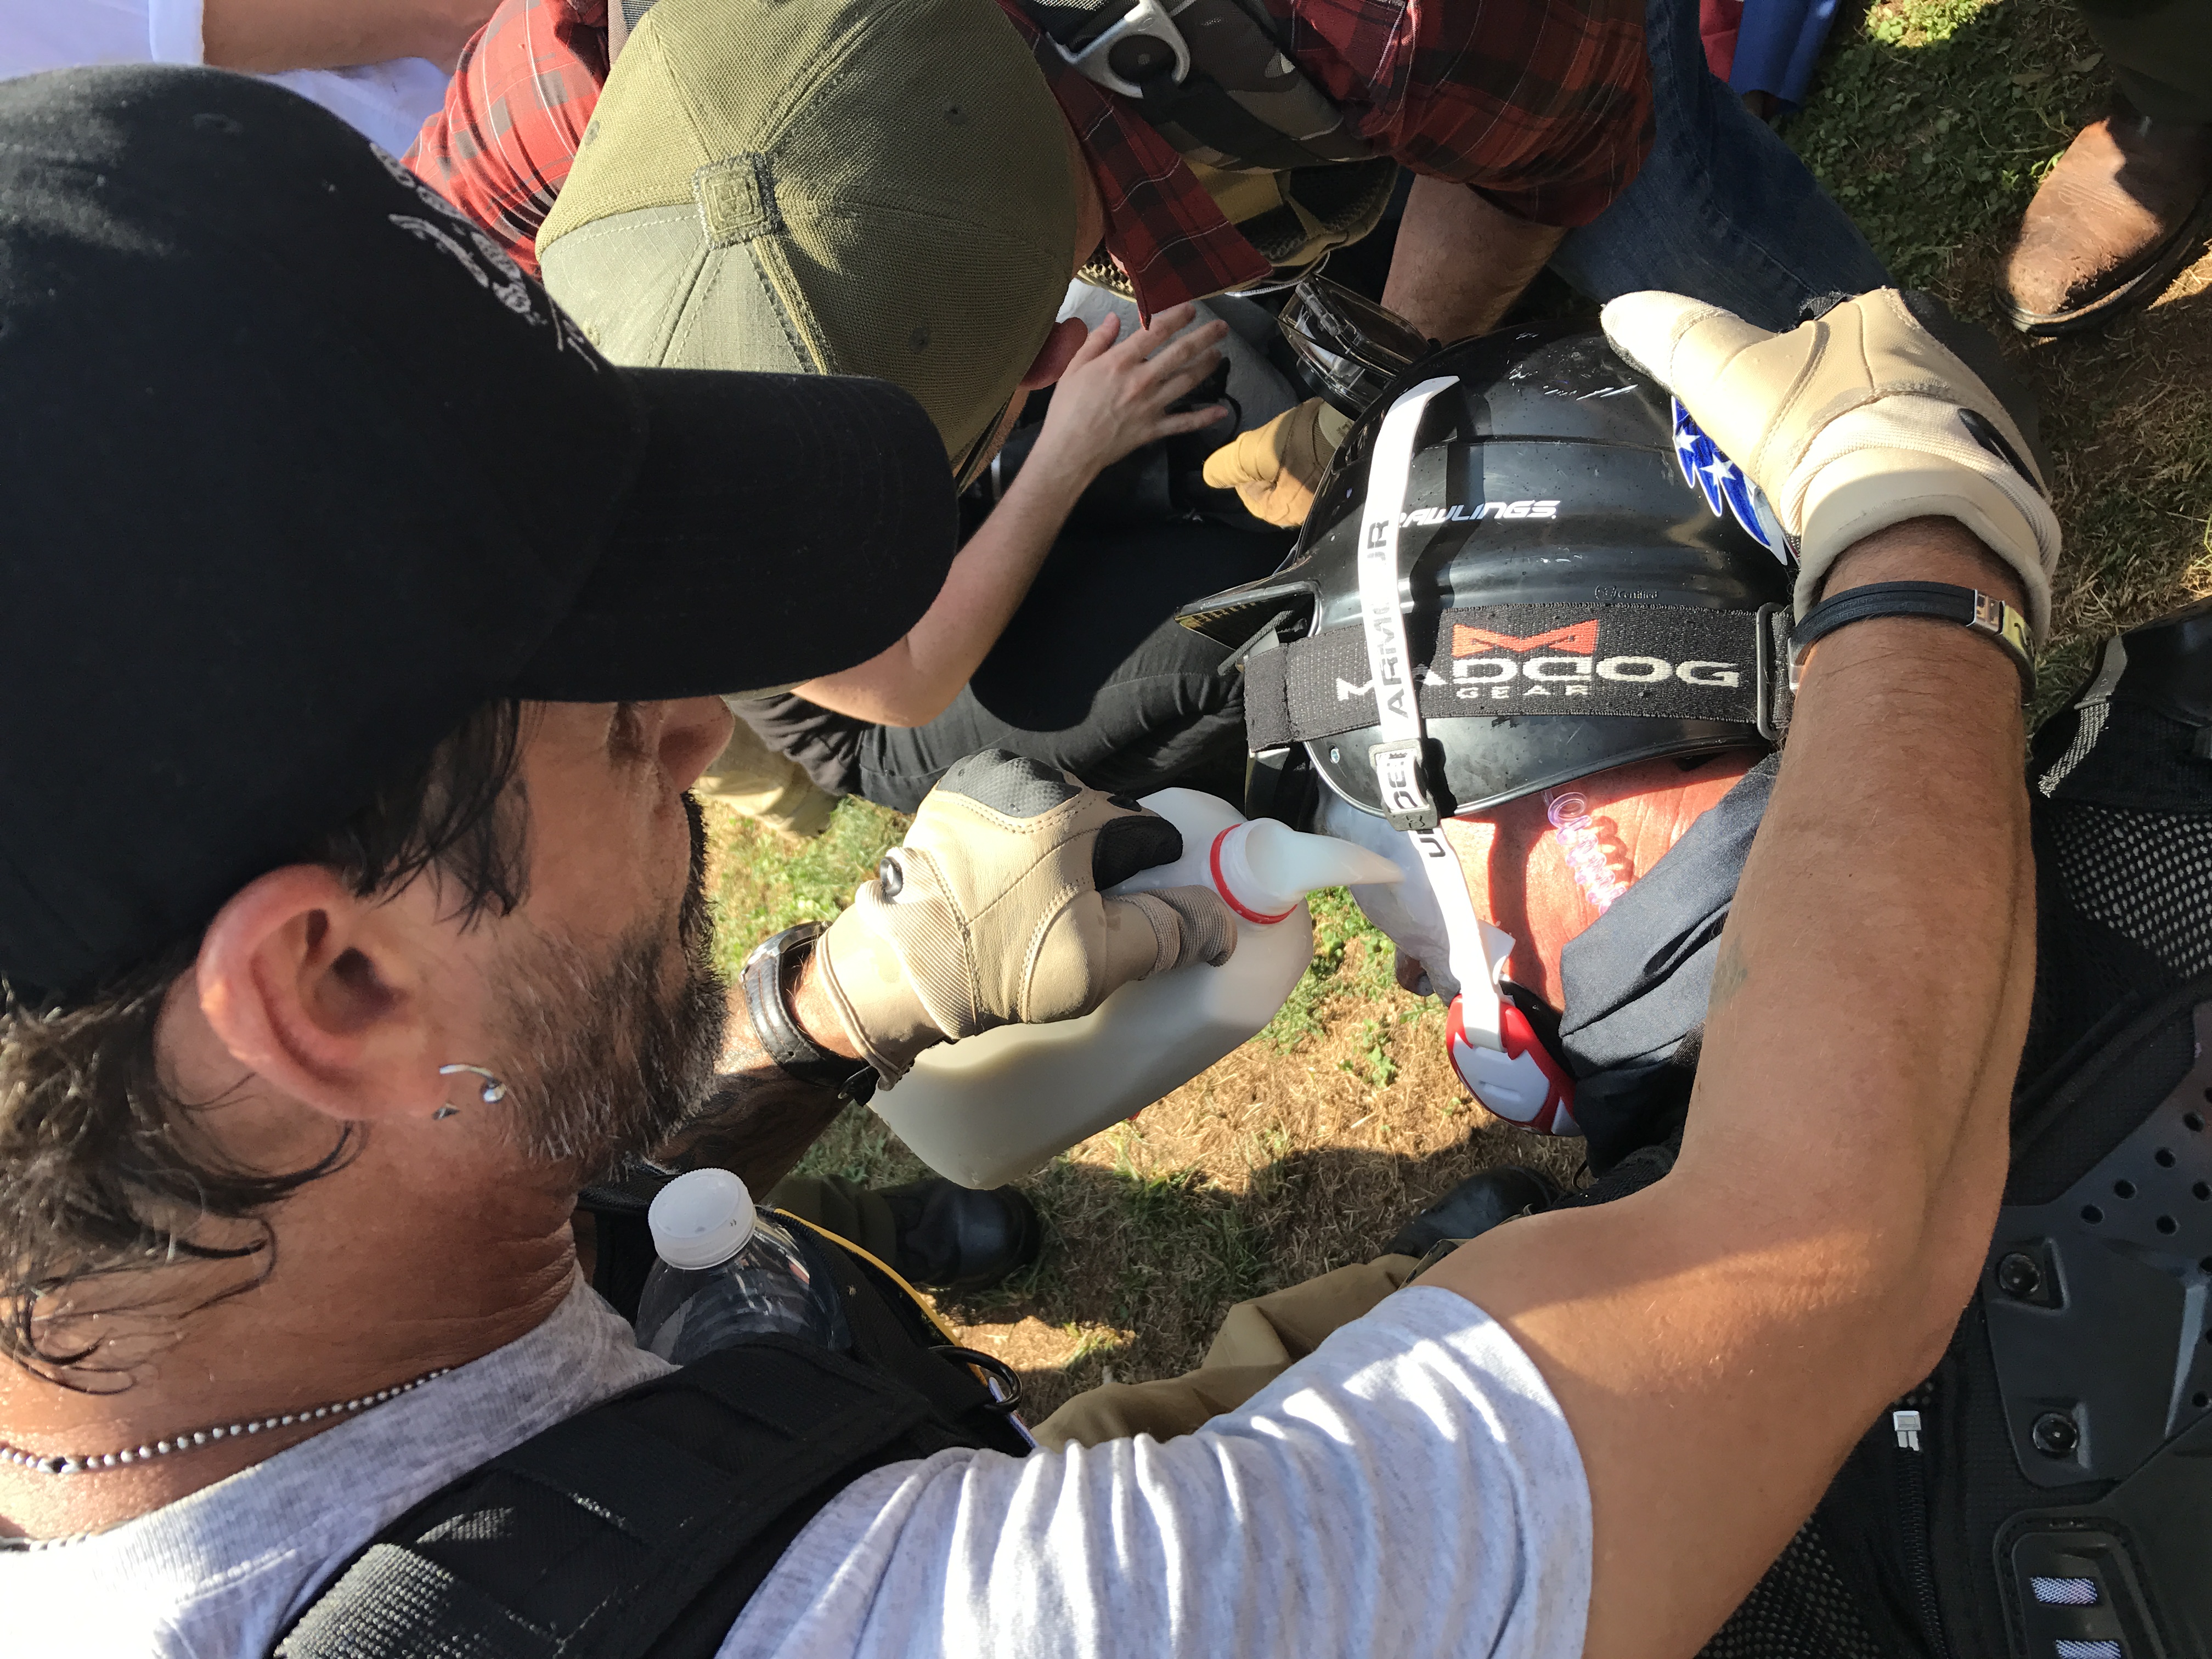 White supremacists poor milk onto the face of a member who was hit with tear gas. (Ted Goodman/TheDCNF)